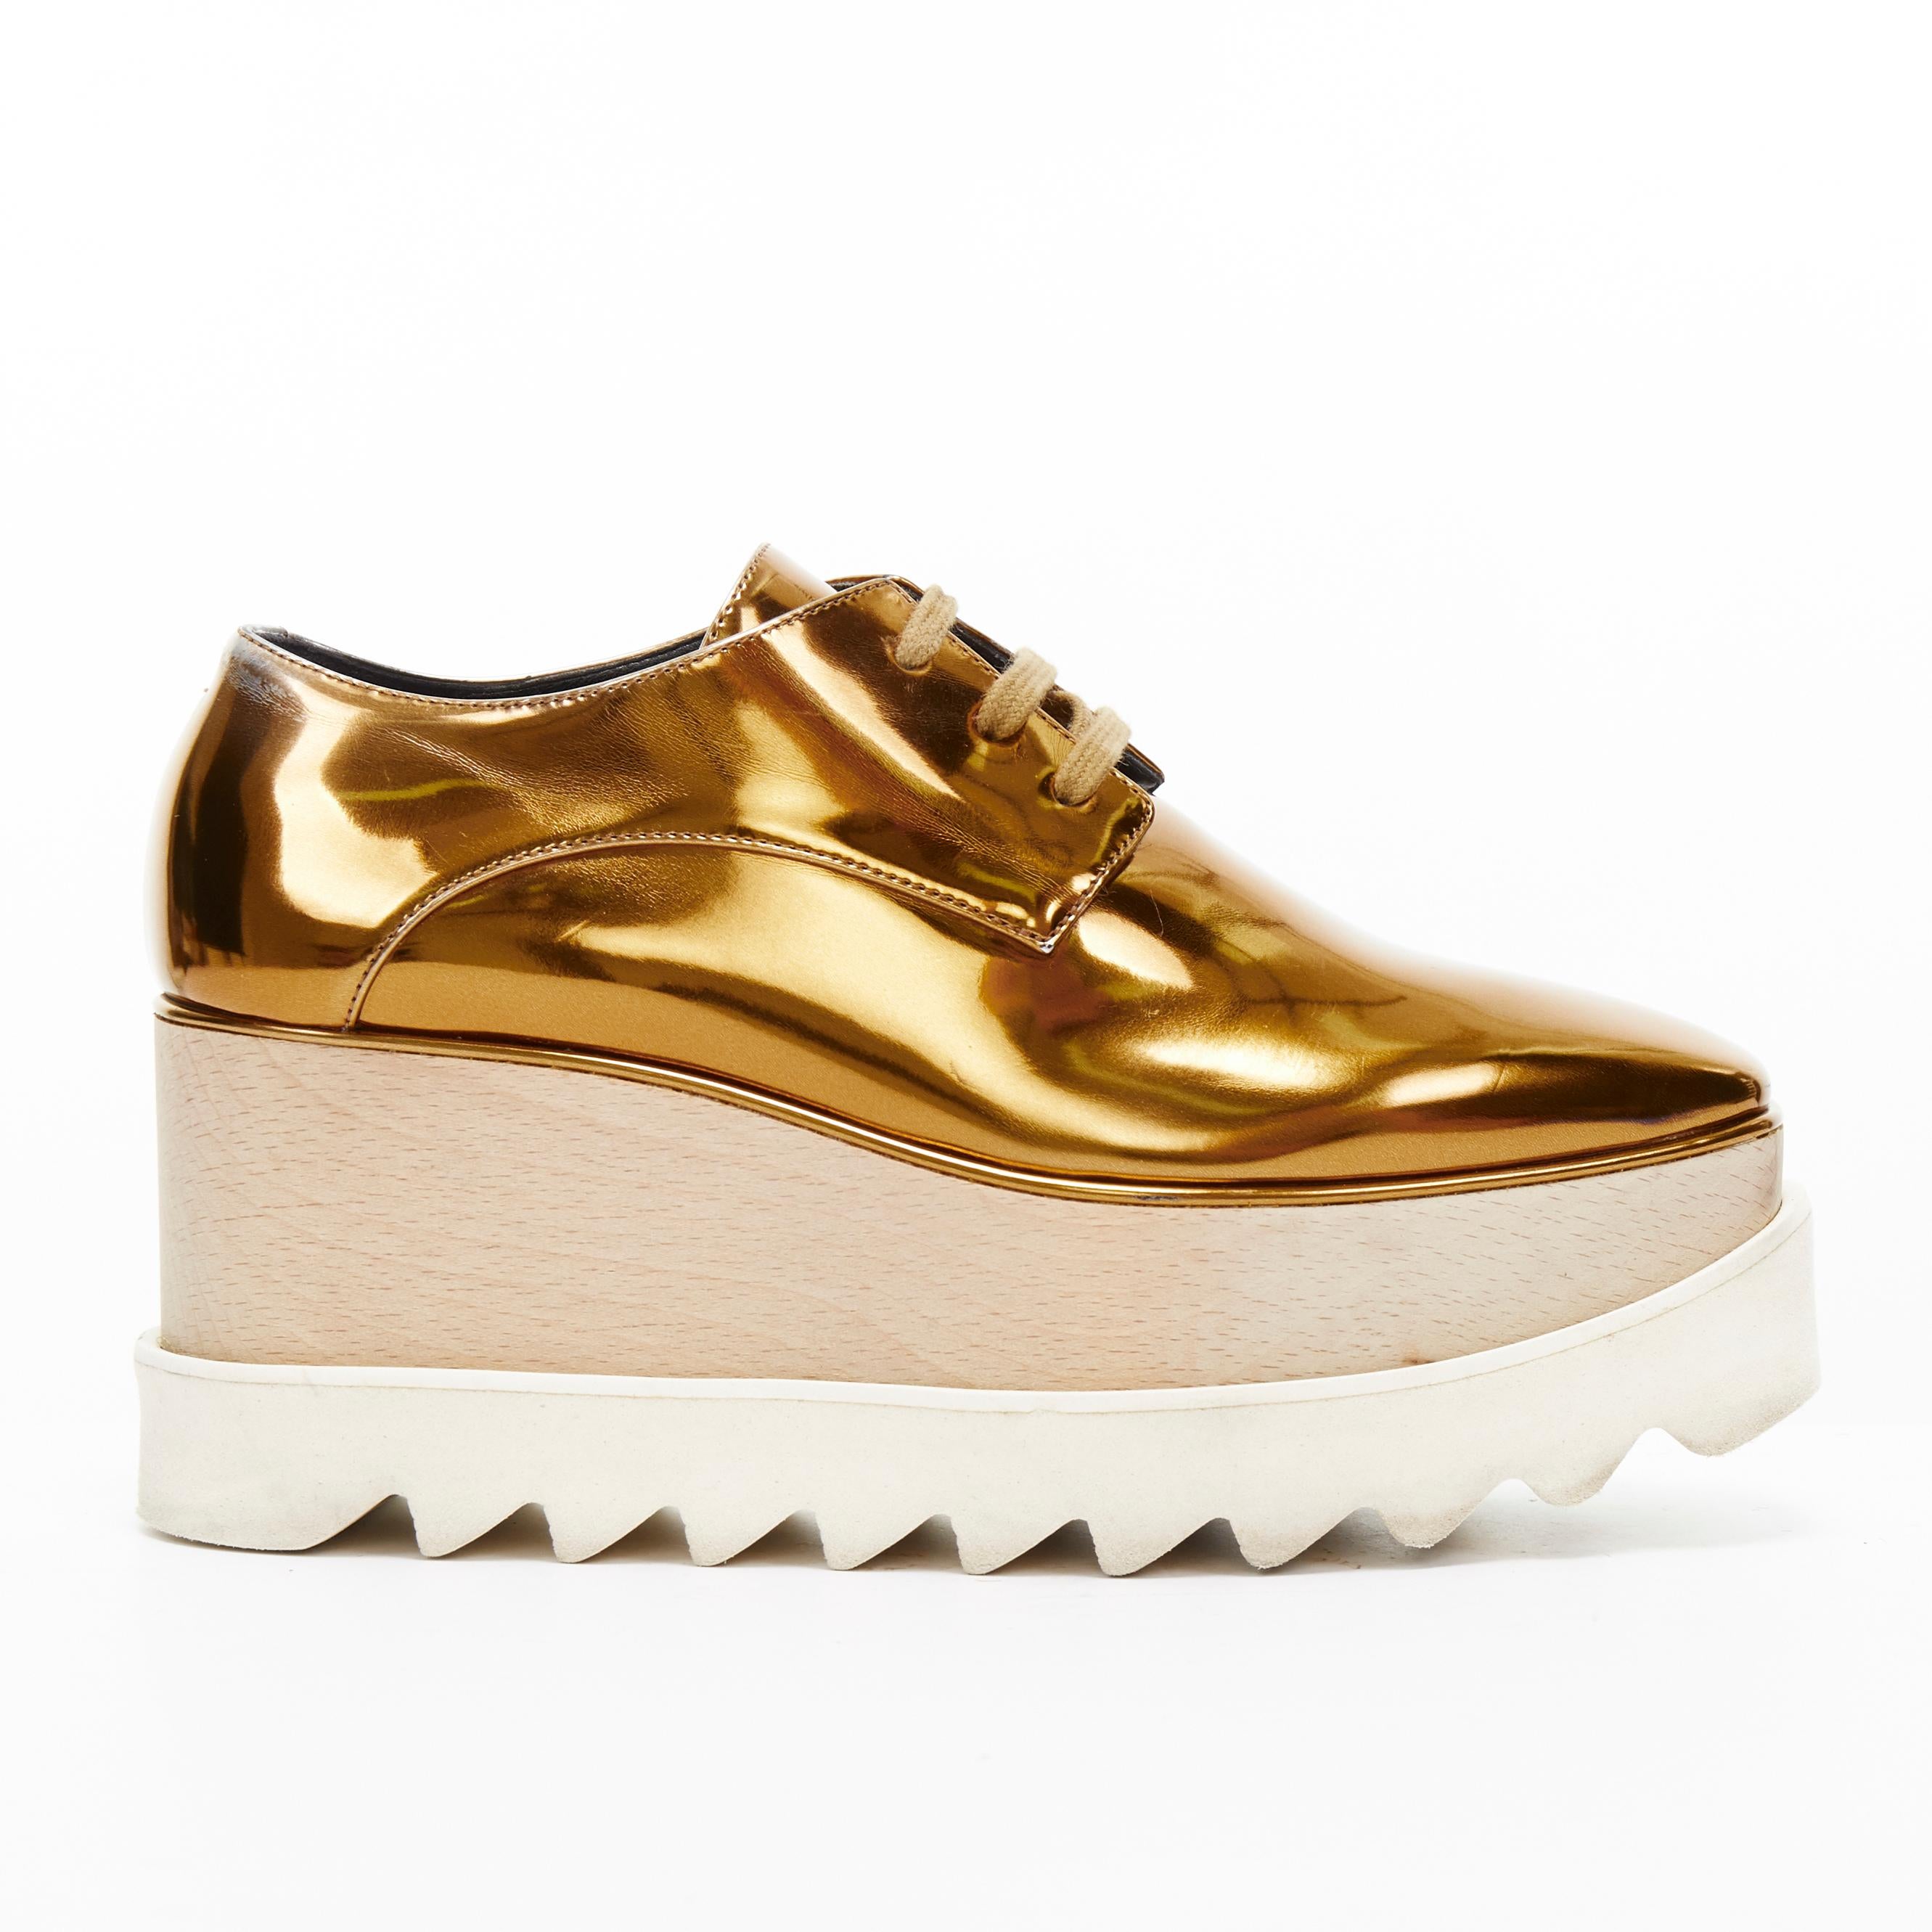 STELLA MCCARTNEY Elyse mirrored gold faux leather wooden platform brogue EU34.5 
Reference: TGAS/A03039 
Brand: Stella McCartney 
Model: Elyse 
Material: Faux leather 
Color: Gold 
Pattern: Solid 
Closure: Lace Up 
Extra Detail: Elyse platform